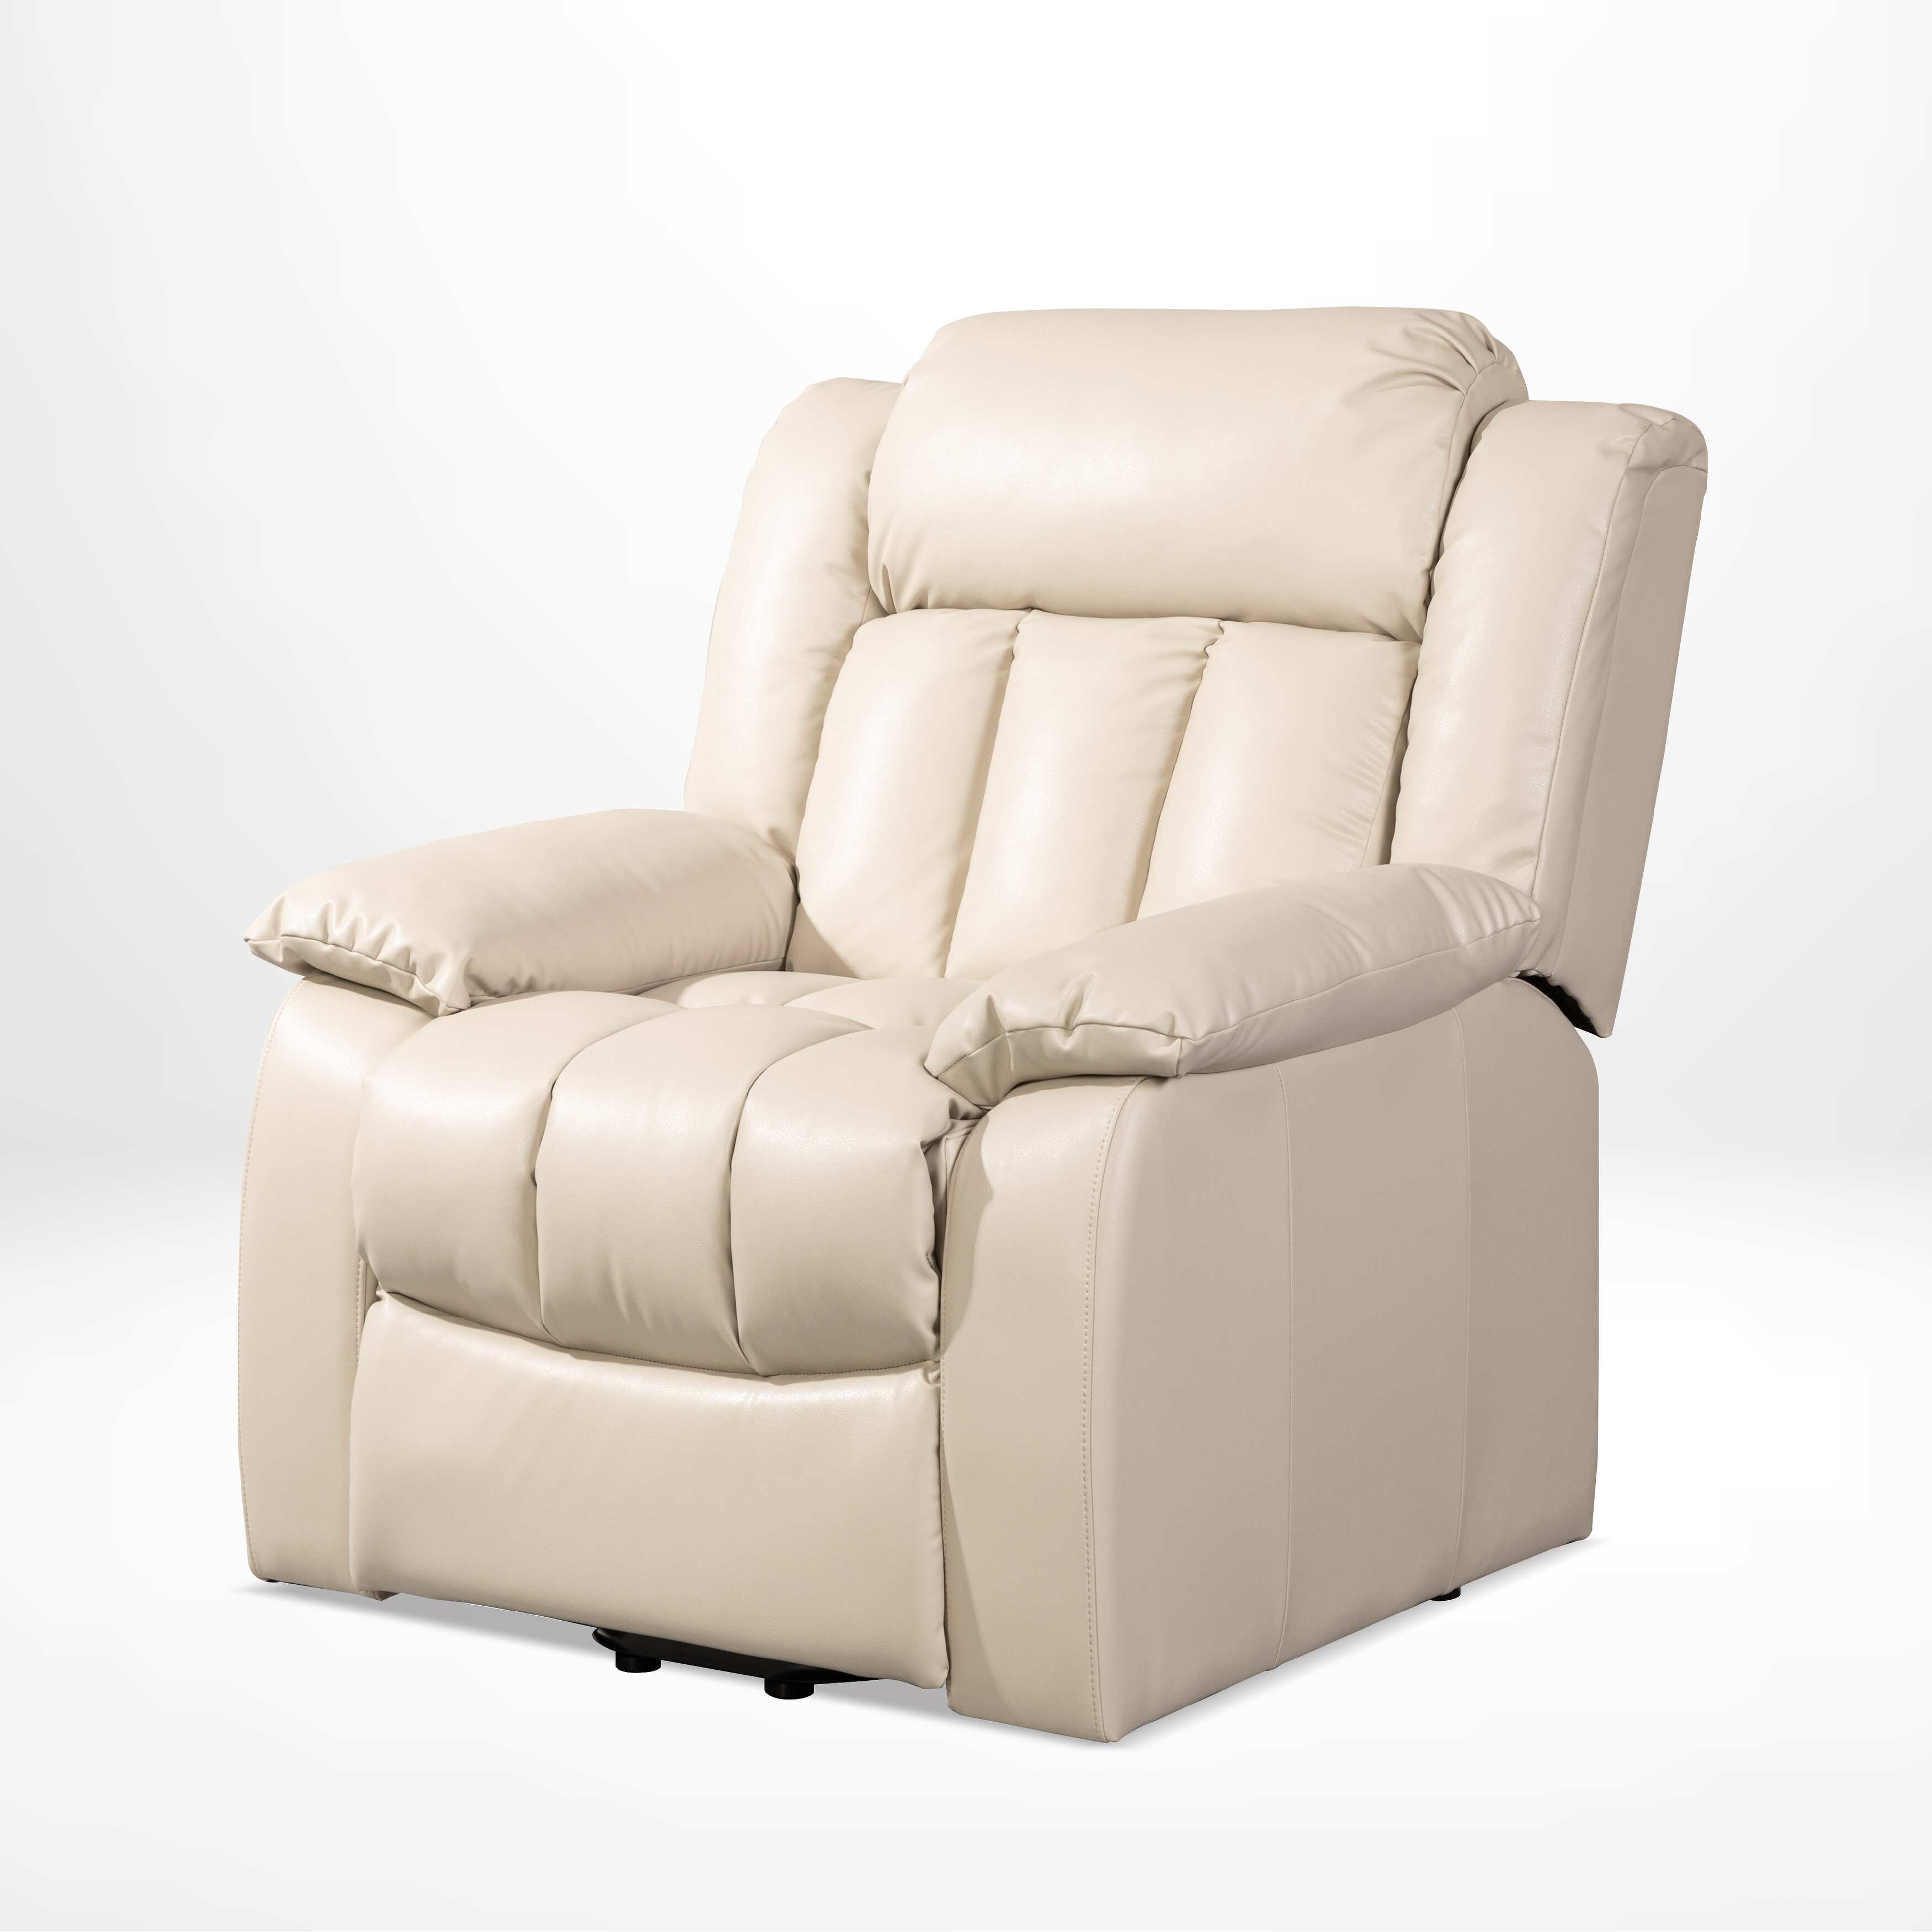 Electric Power Lift Recliner for Elderly with USB Port